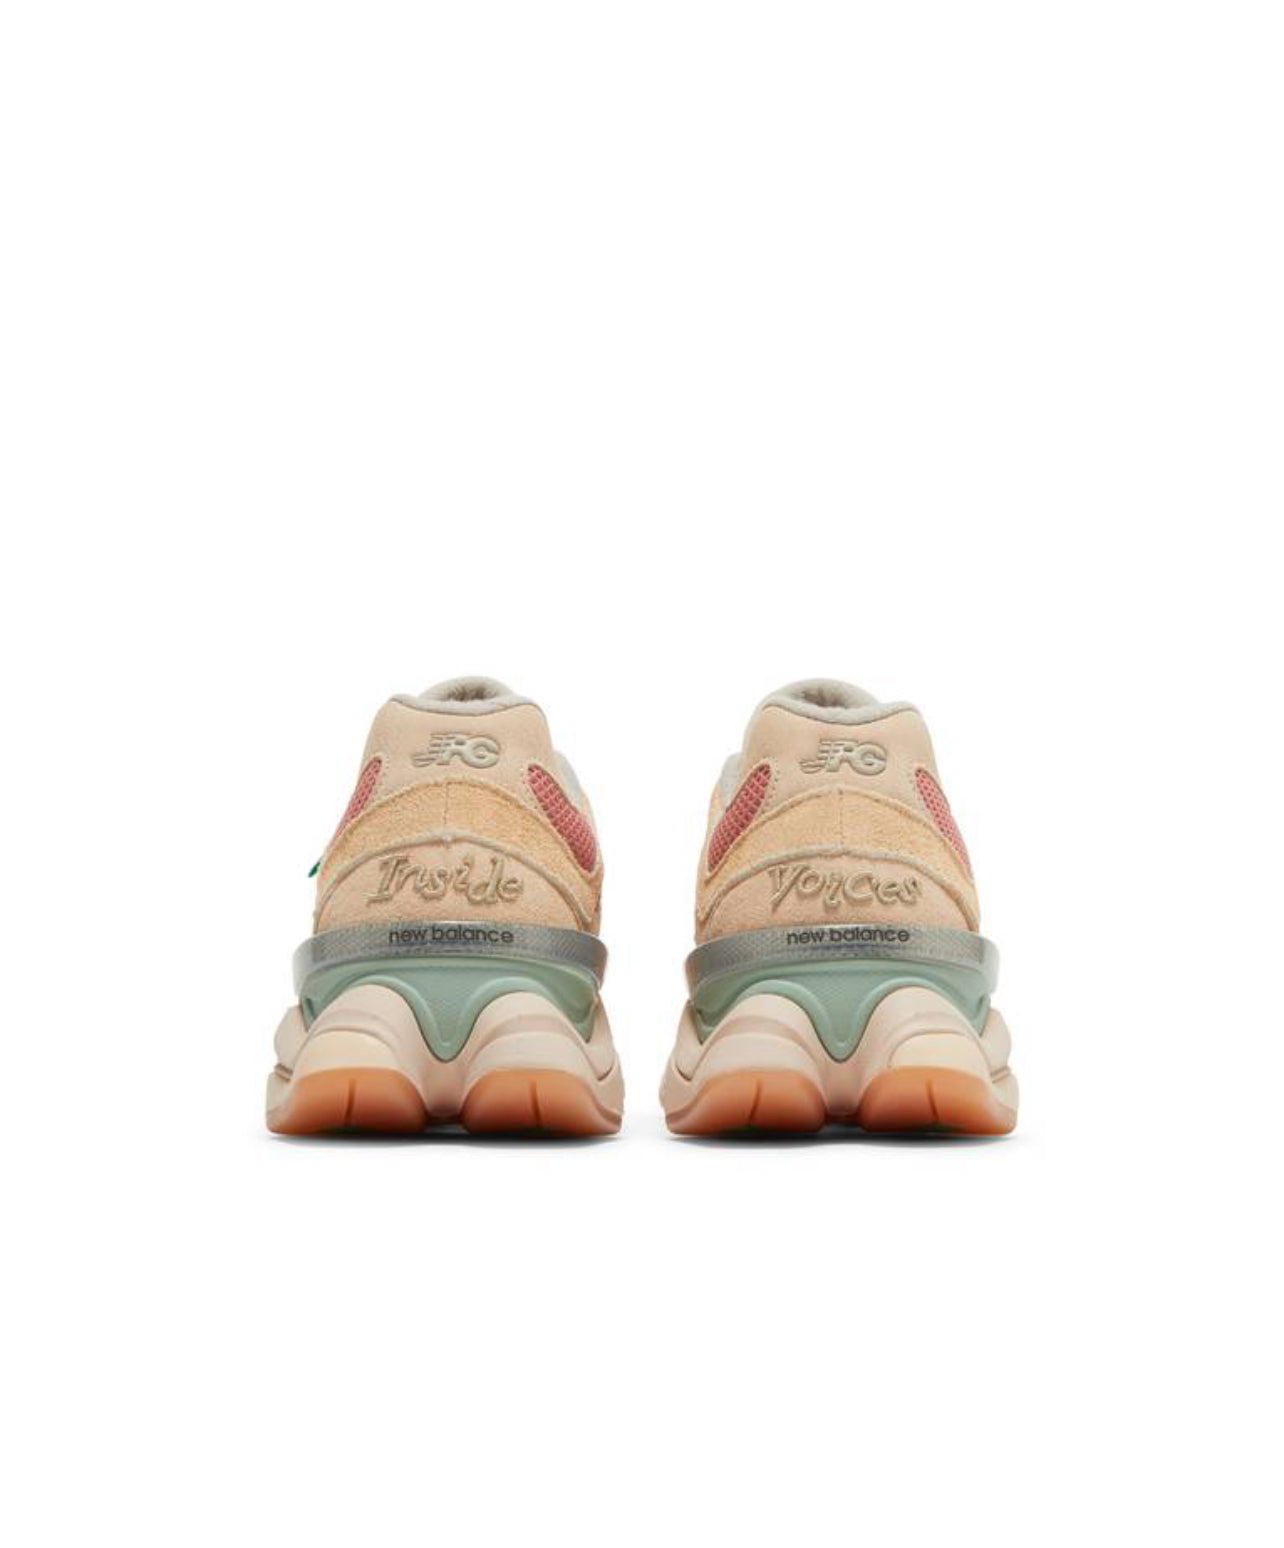 Joe Freshgoods × New Balance 9060 Inside Voices "Penny Cookie Pink"